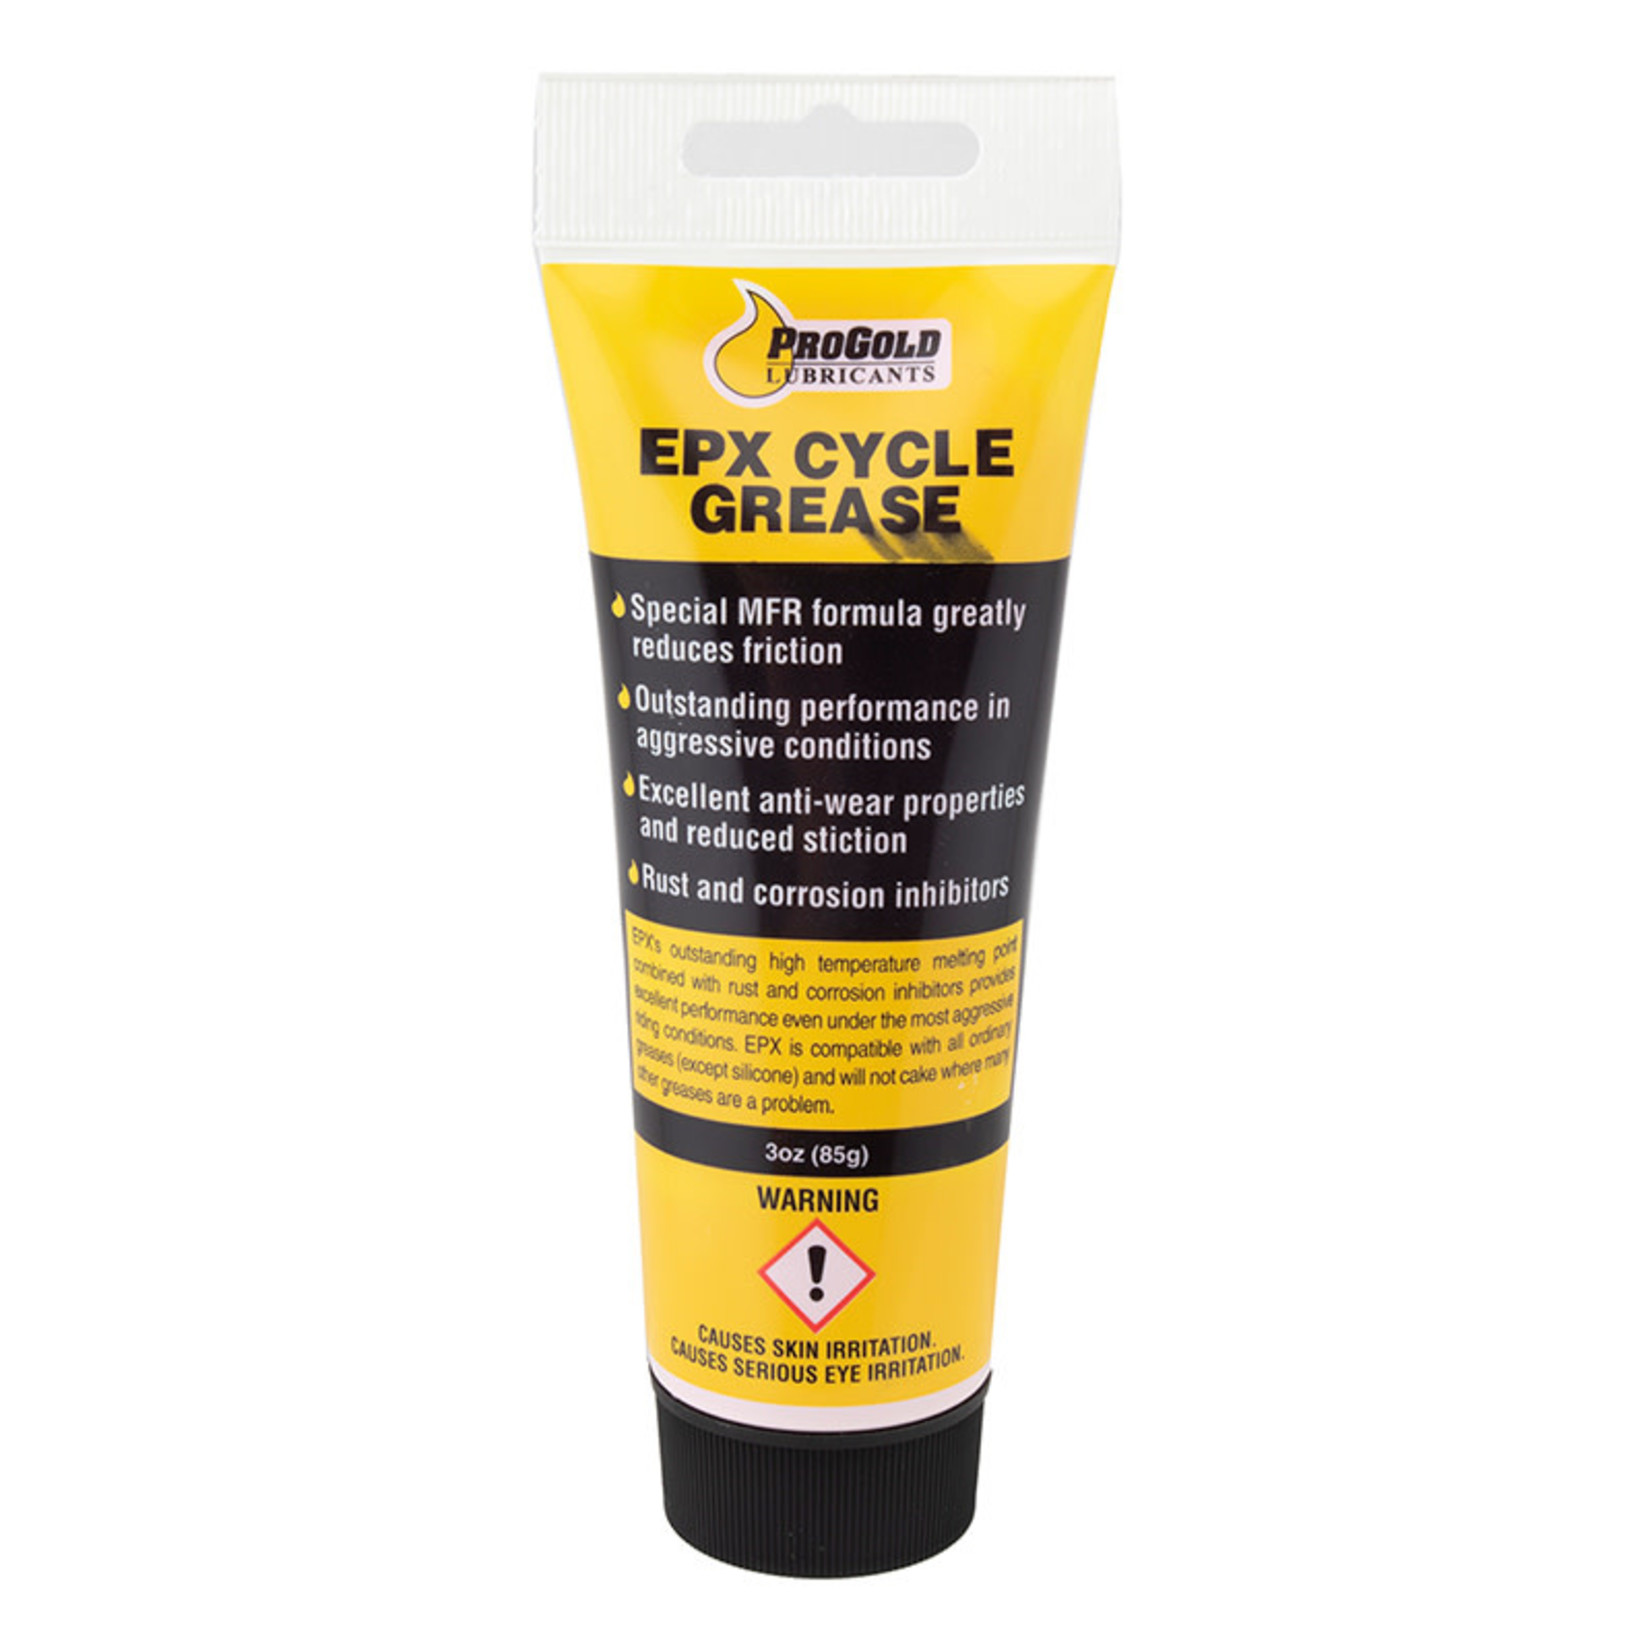 Pro Gold EPX Cycle Grease